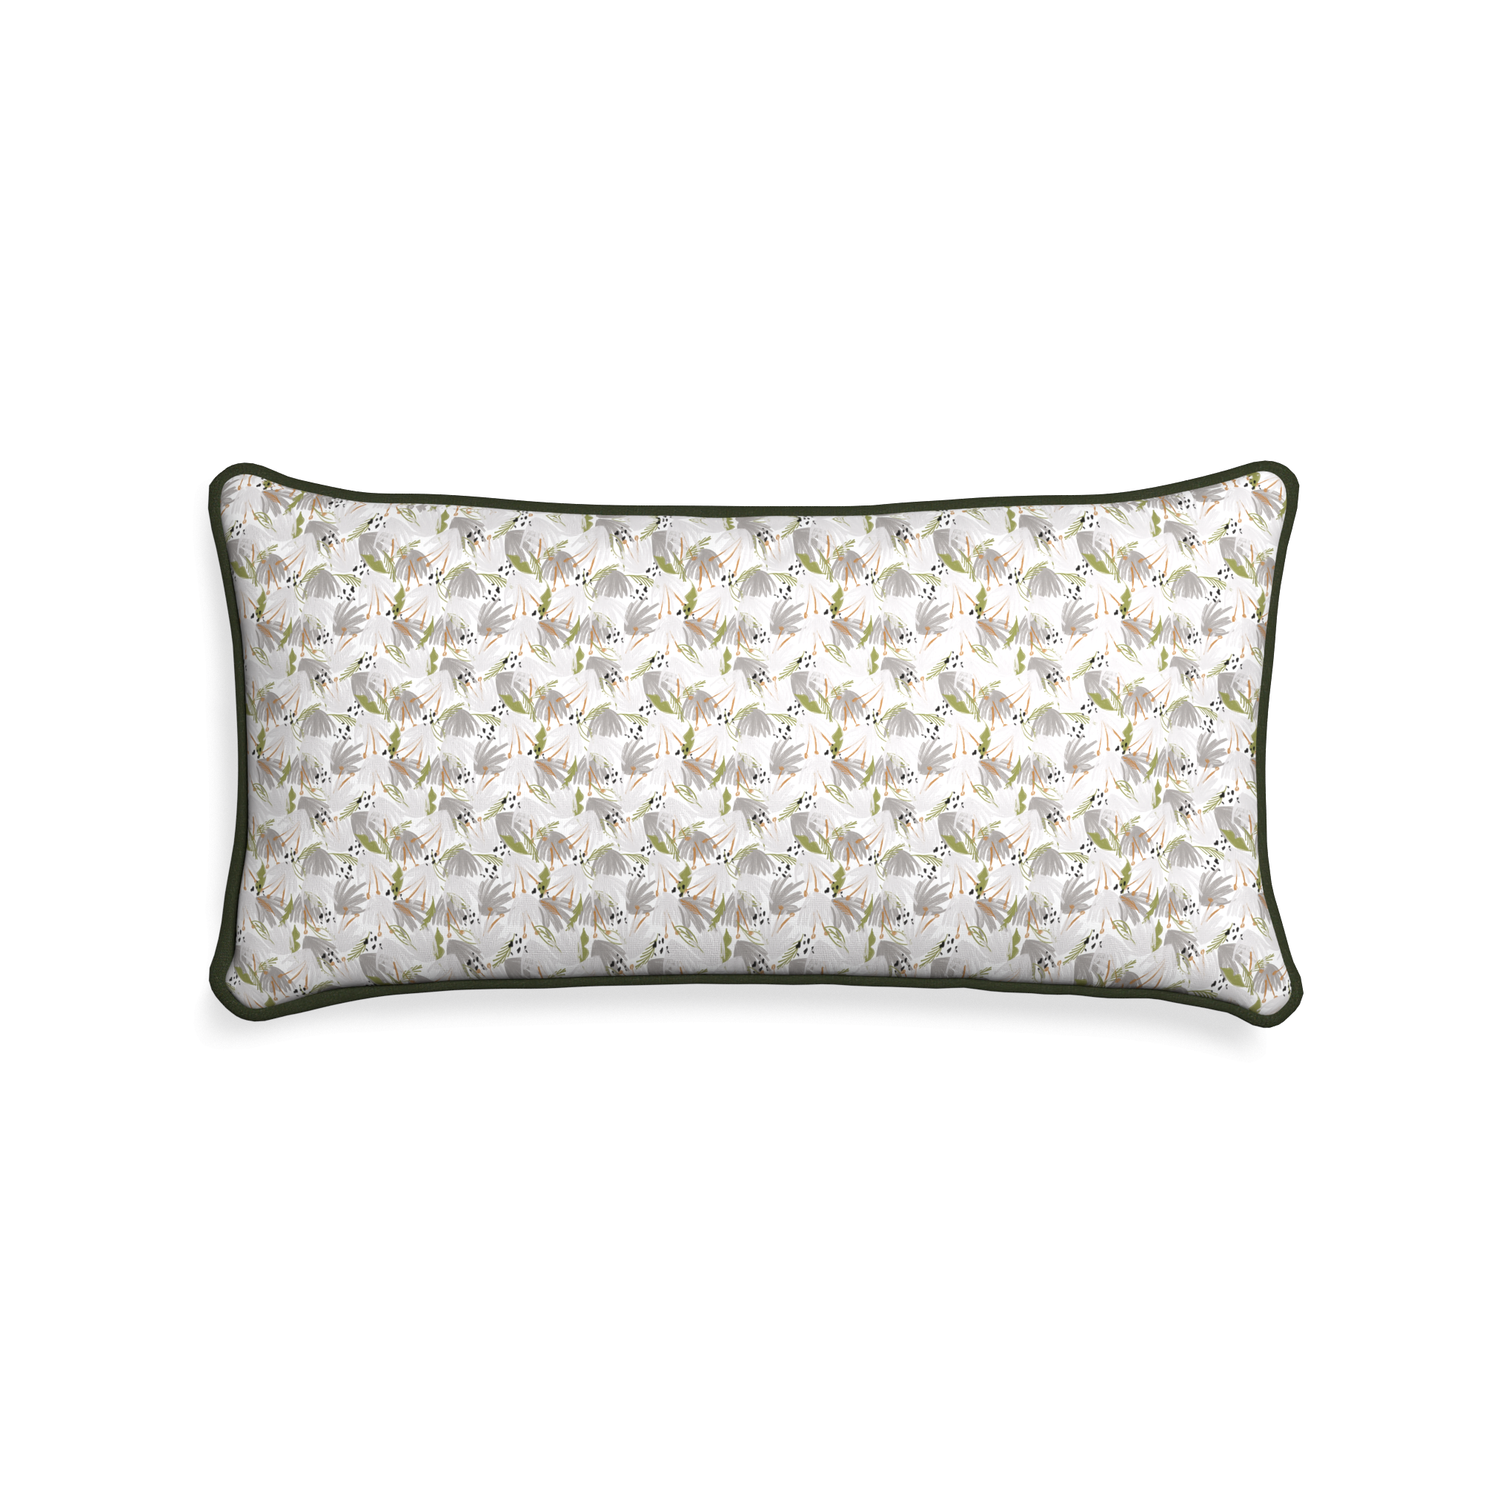 Midi-lumbar eden grey custom grey floralpillow with f piping on white background